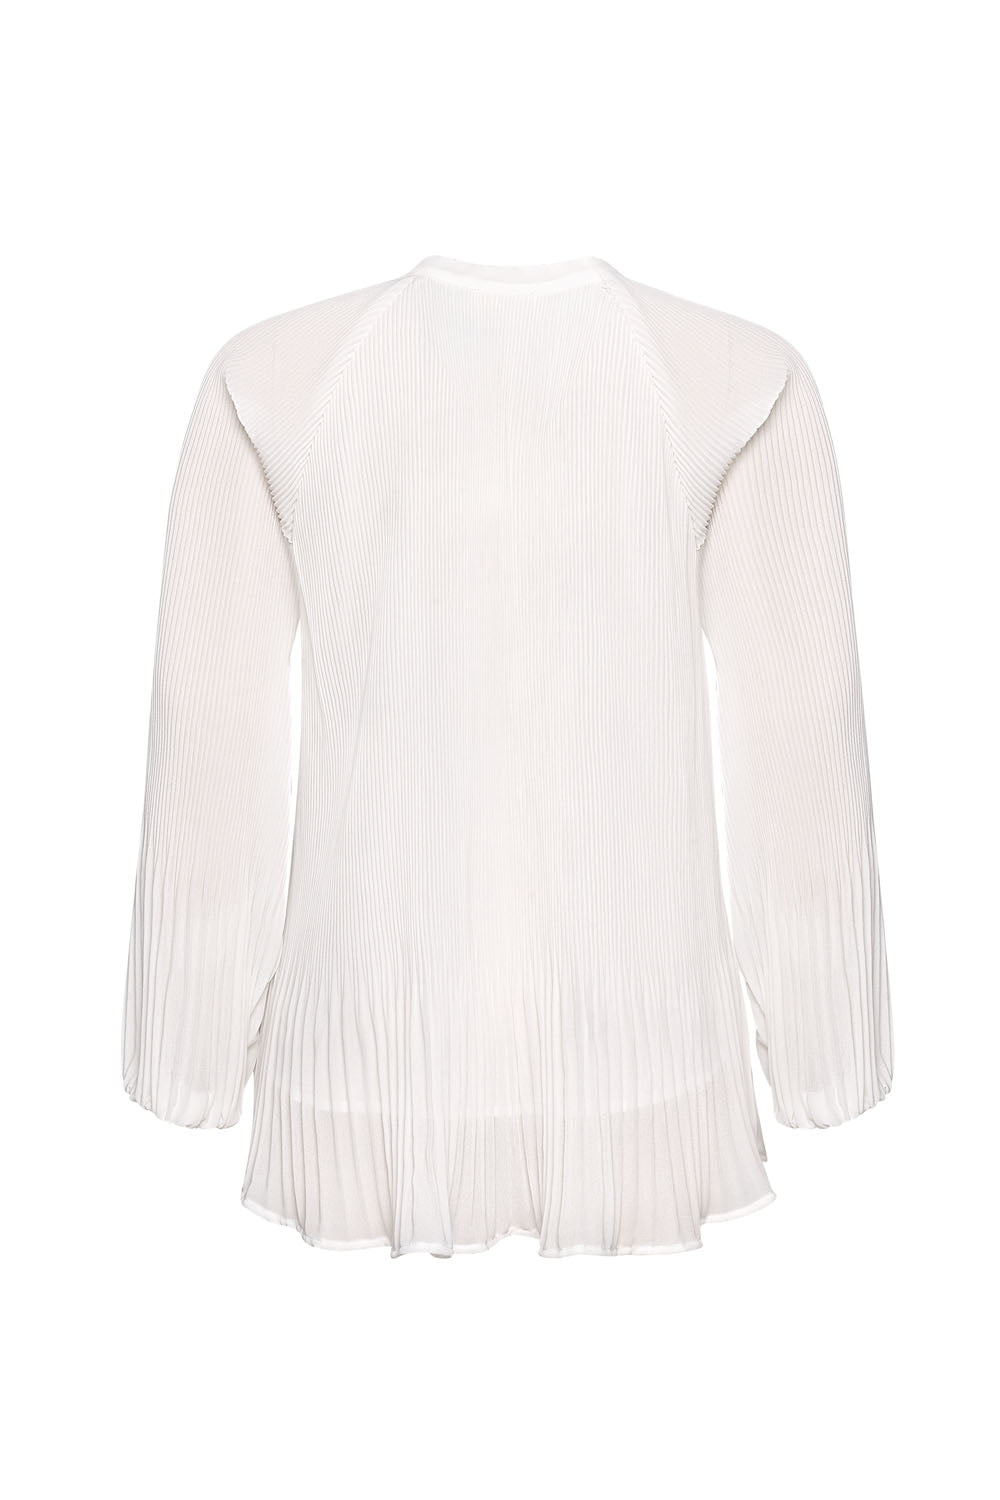 MADLY SWEETLY JUST PLEAT IT TOP - WINTER WHITE - THE VOGUE STORE